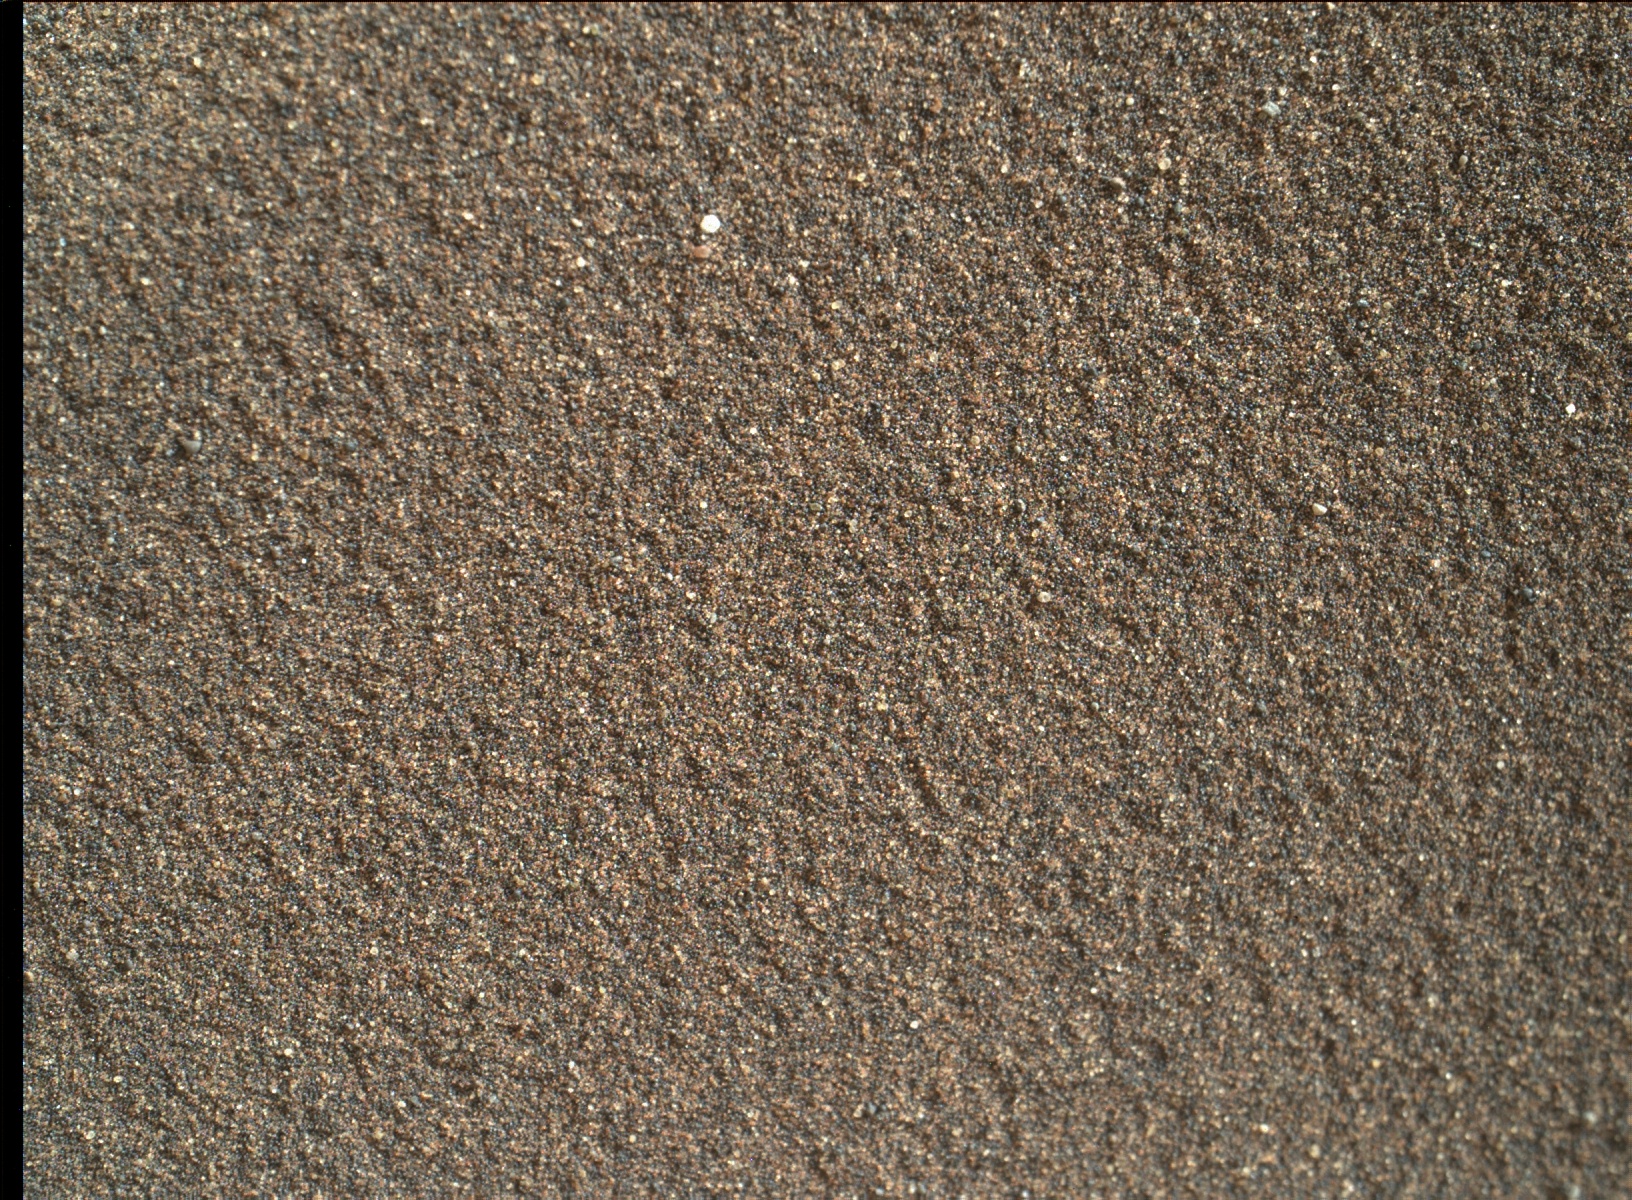 Nasa's Mars rover Curiosity acquired this image using its Mars Hand Lens Imager (MAHLI) on Sol 1603